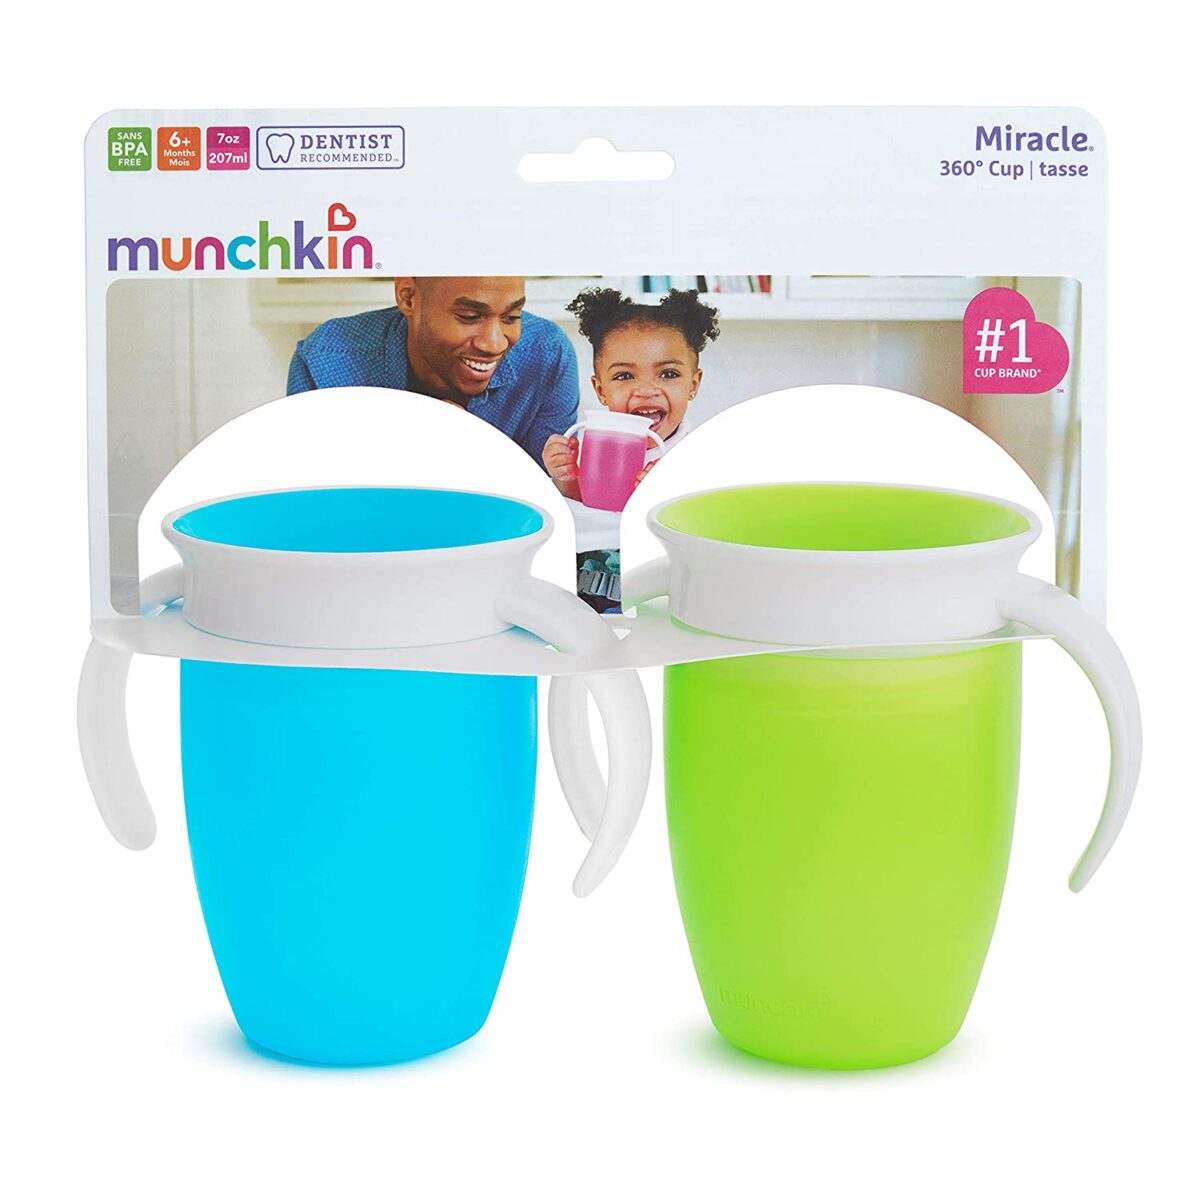 Munchkin Miracle 360 Trainer Cup, Green, Blue, 7 Oz, 2 Count